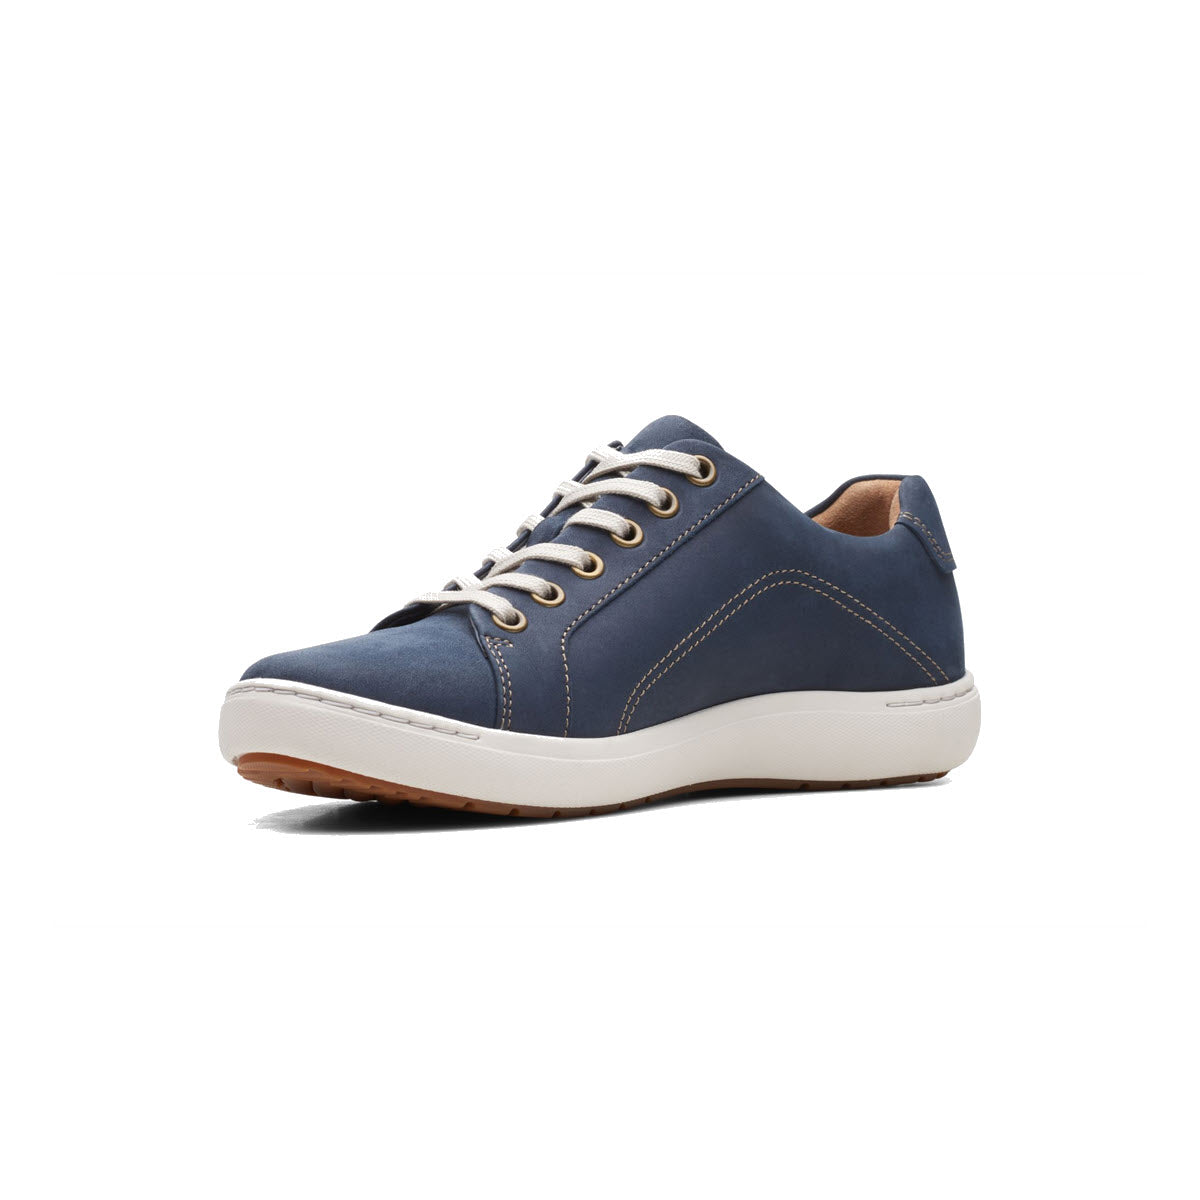 A single Clarks Nalle Lace sneaker in navy blue with white laces and a brown sole, isolated on a white background.